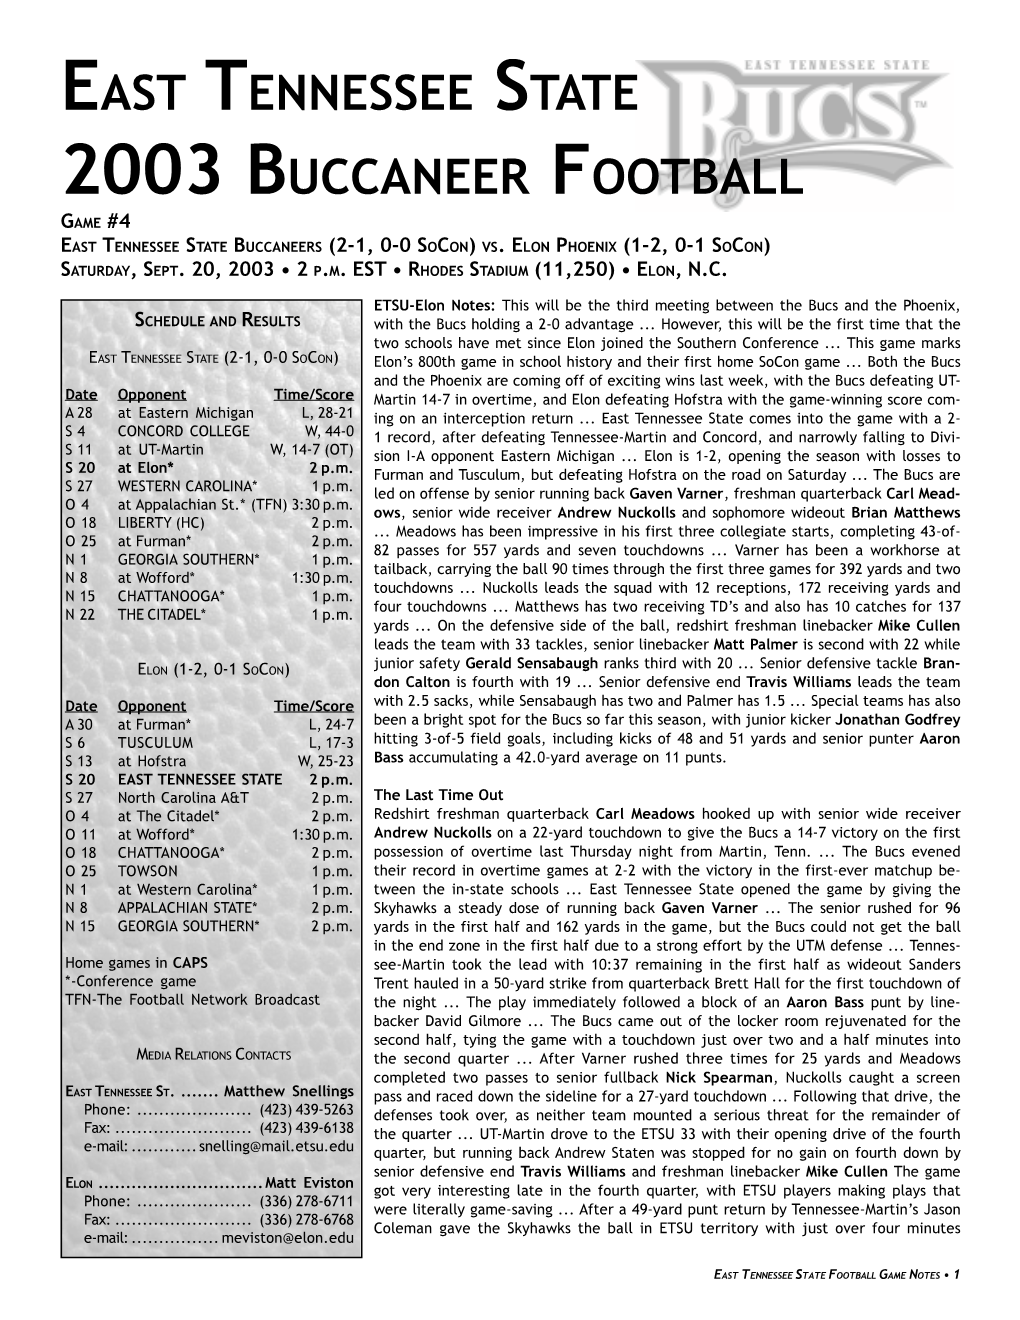 East Tennessee State 2003 Buccaneer Football Game #4 East Tennessee State Buccaneers (2-1, 0-0 Socon) Vs